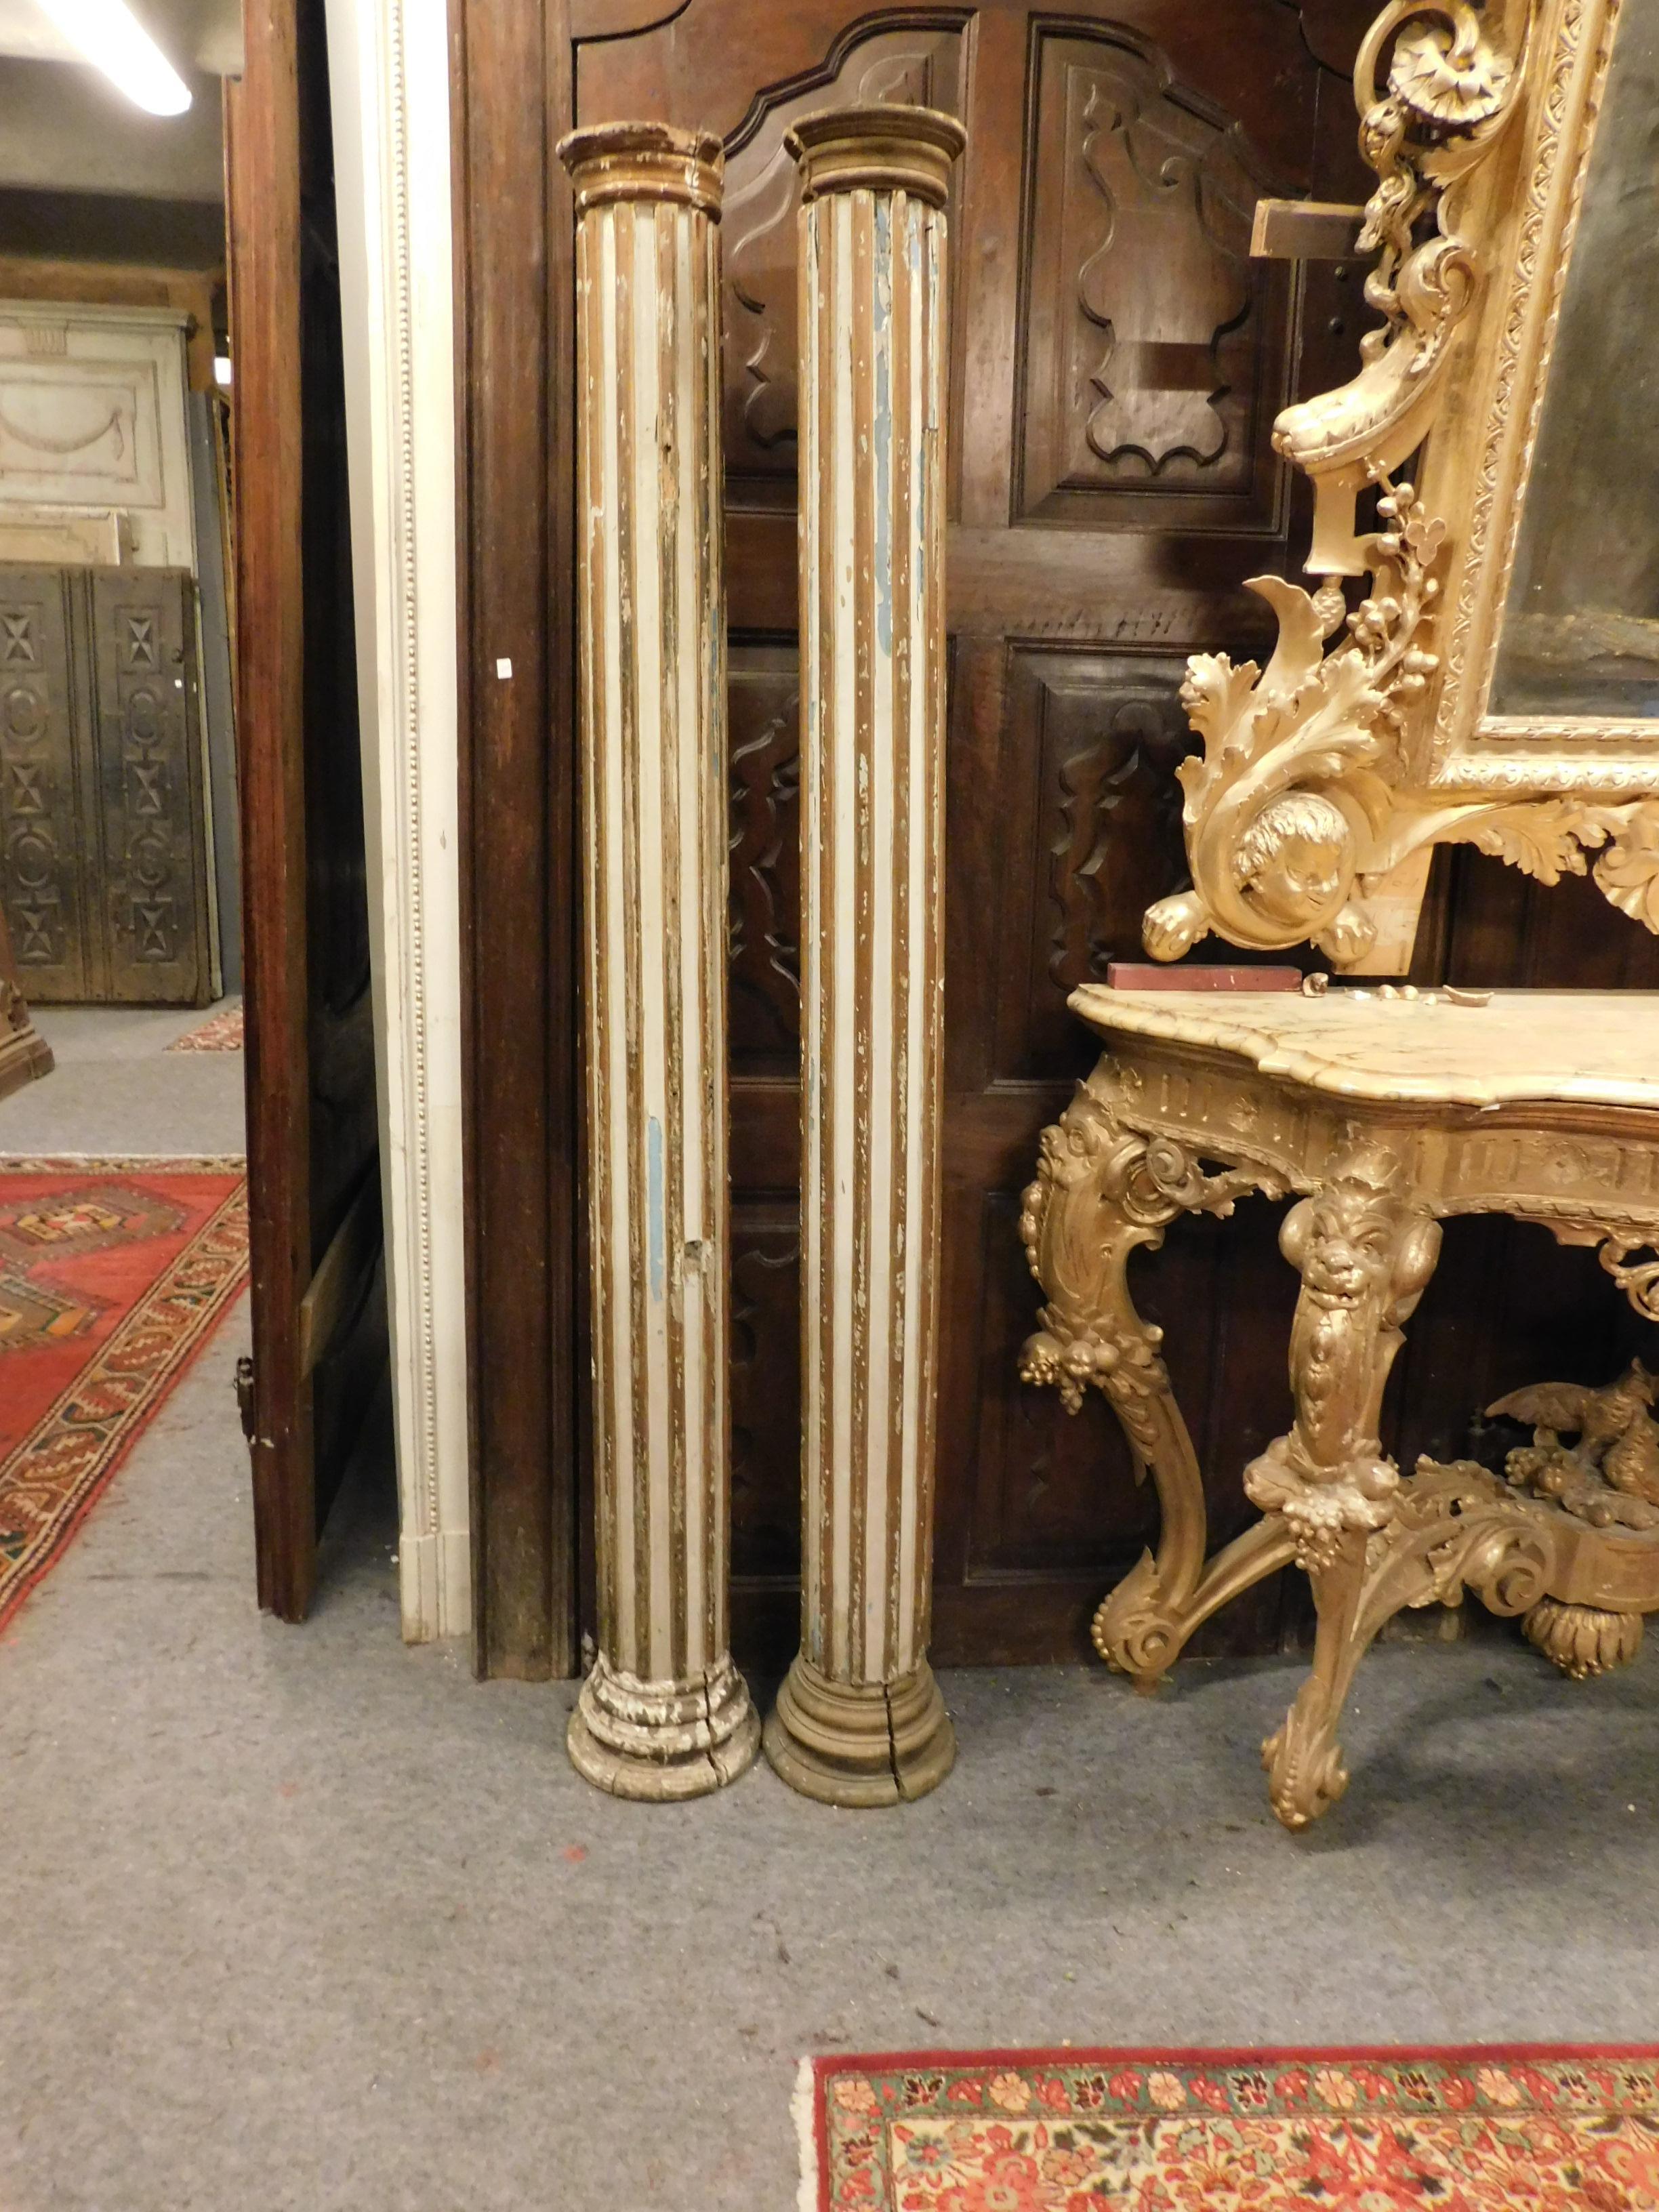 Antique Set of 2 columns in lacquered and gilded wood, light blue and white, with molure and golden capitals. They are flat on the back so they must be used on a wall or not in the center of the room.
Very old and in good condition, original patina